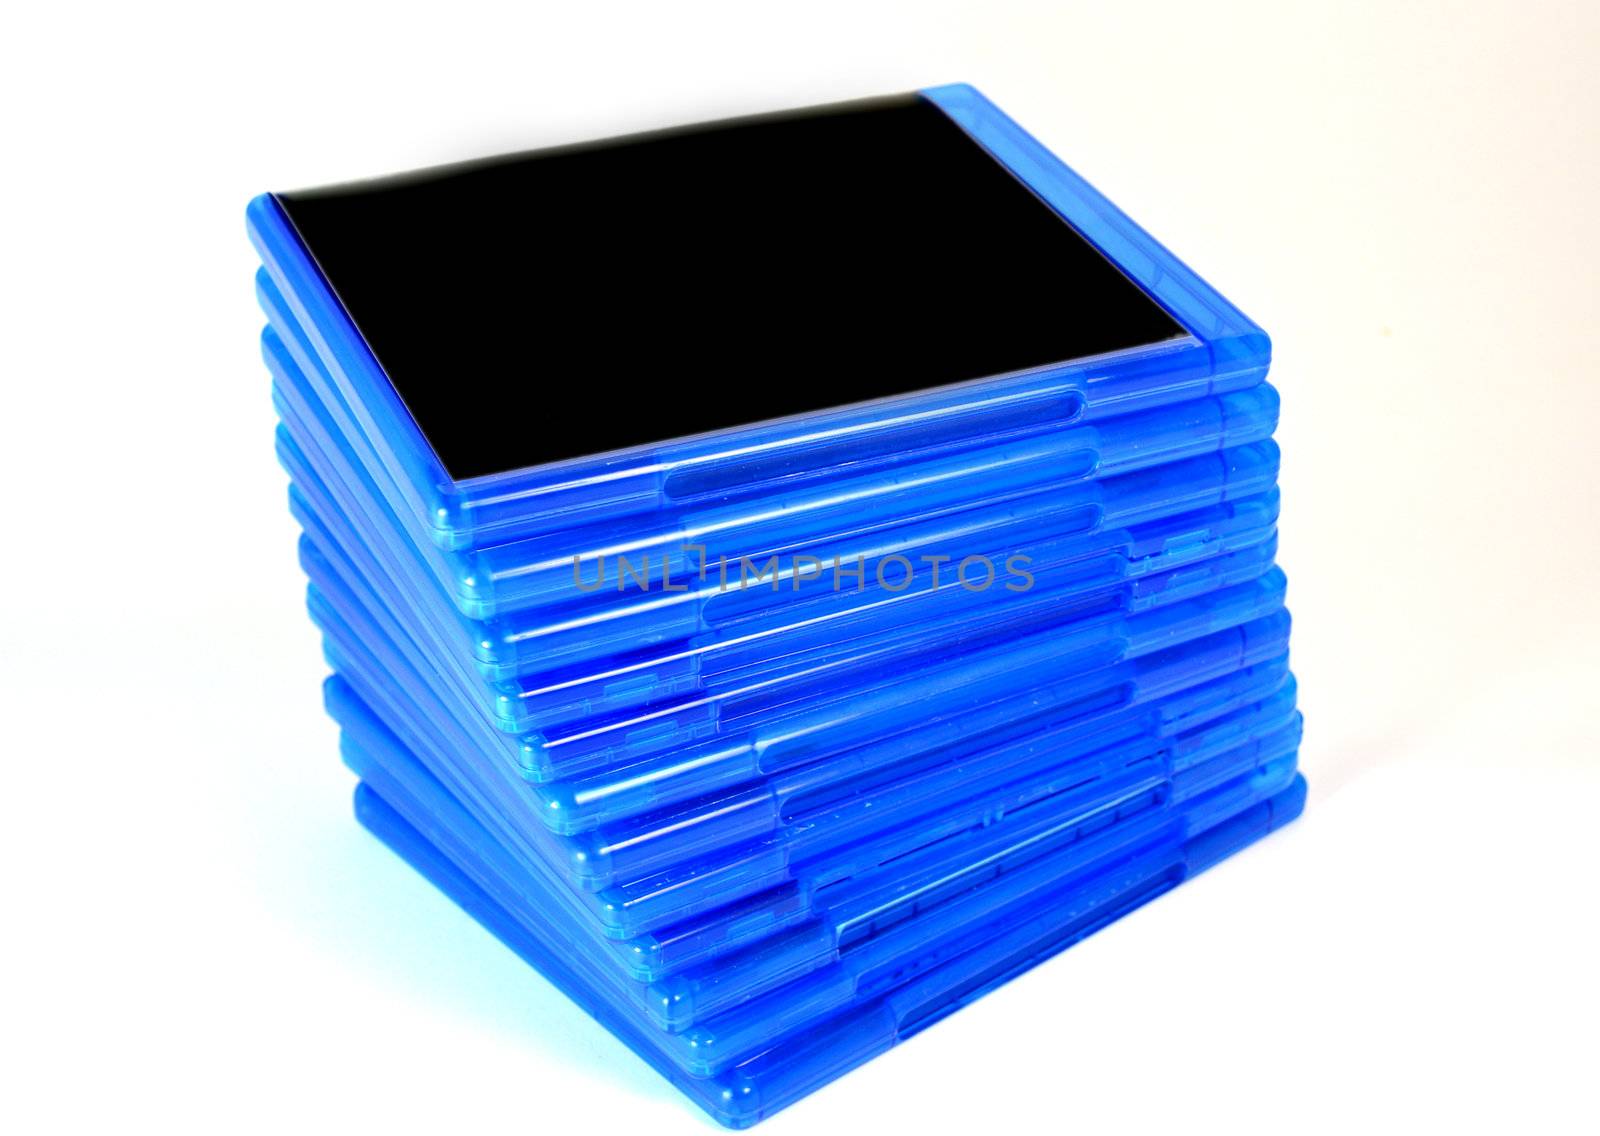 Stack of Bluray disk boxes by artofphoto